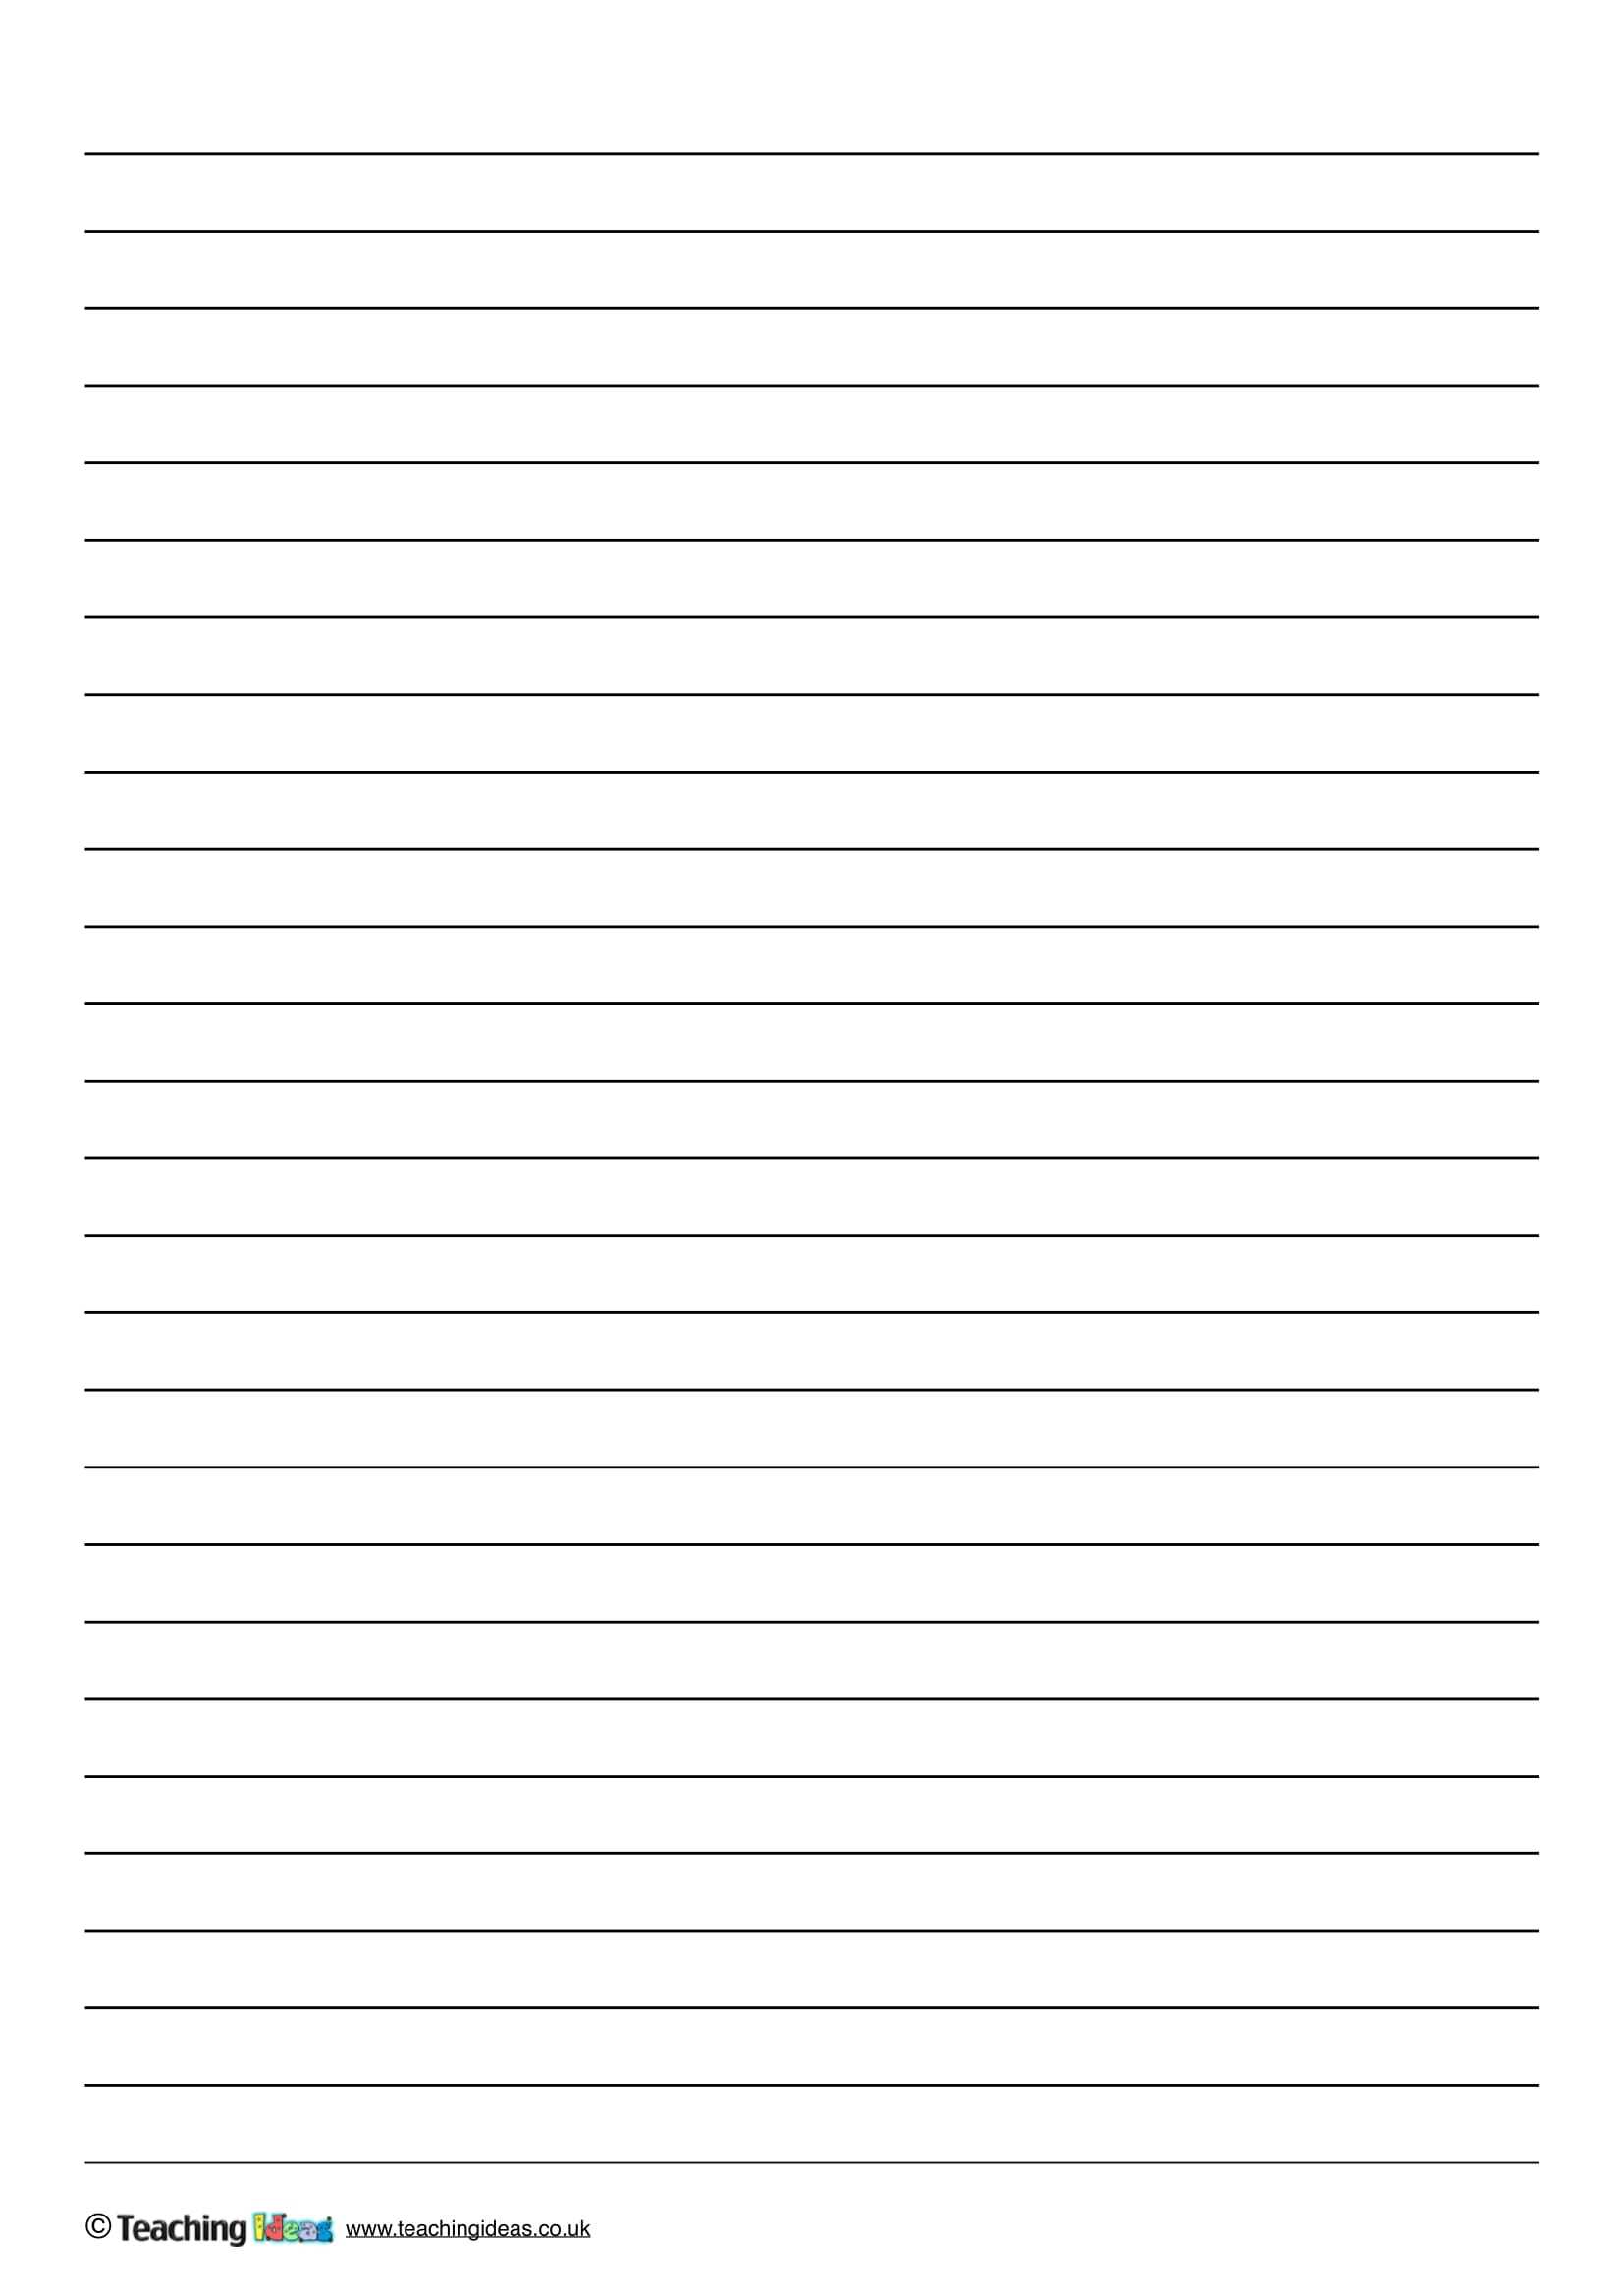 Notebook Paper Template For Word Microsoft Office Templates Gambaran